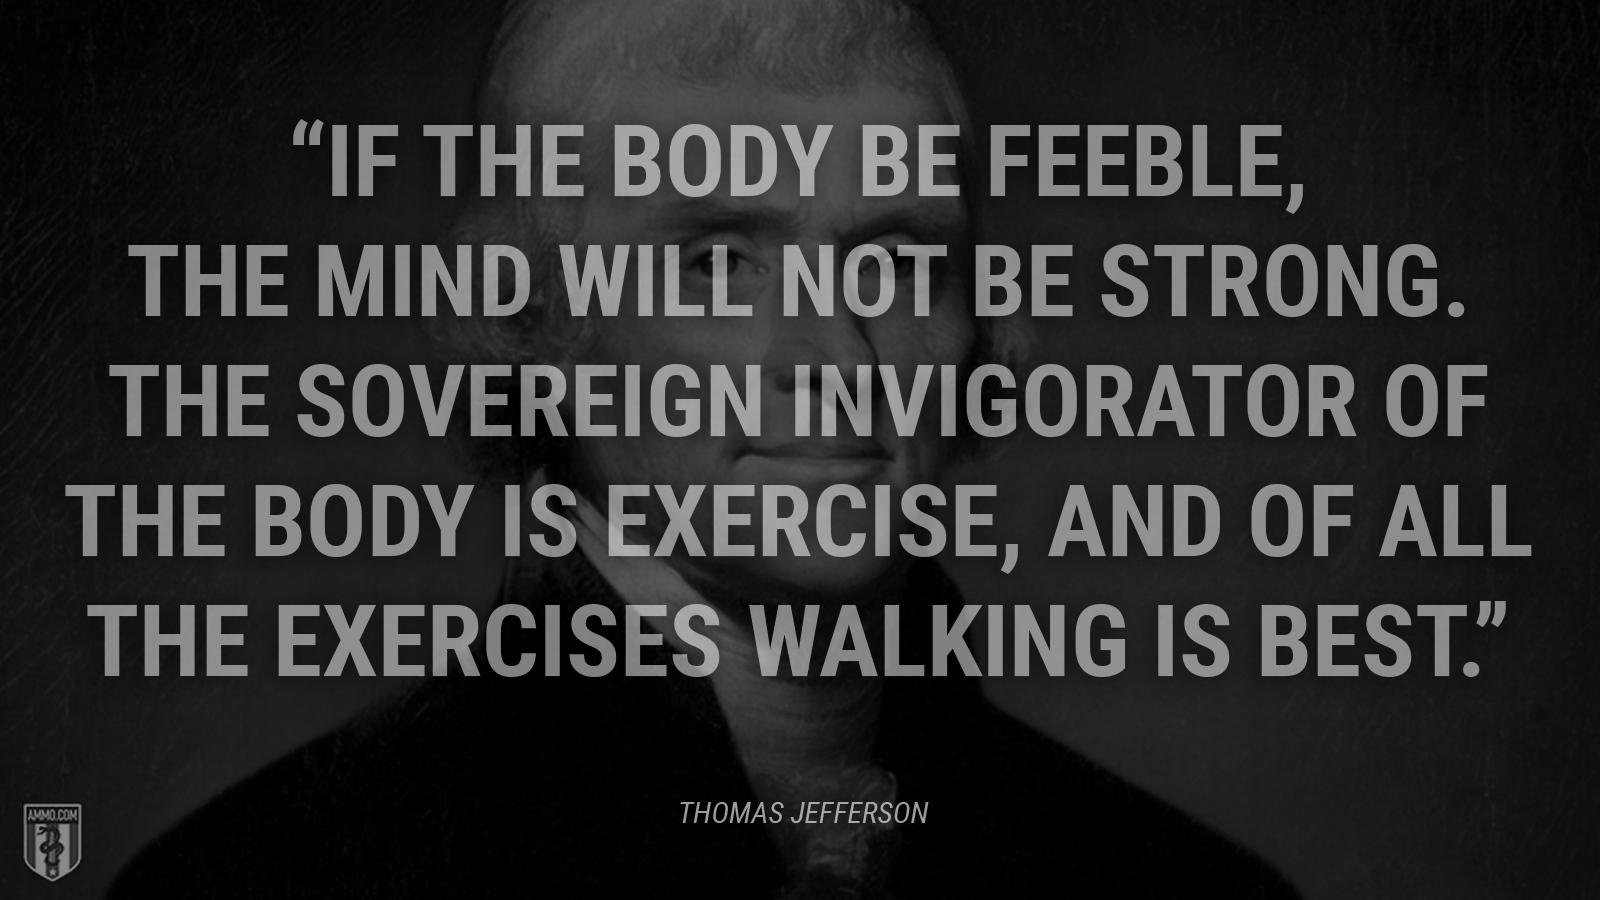 “If the body be feeble, the mind will not be strong. The sovereign invigorator of the body is exercise, and of all the exercises walking is best.” - Thomas Jefferson